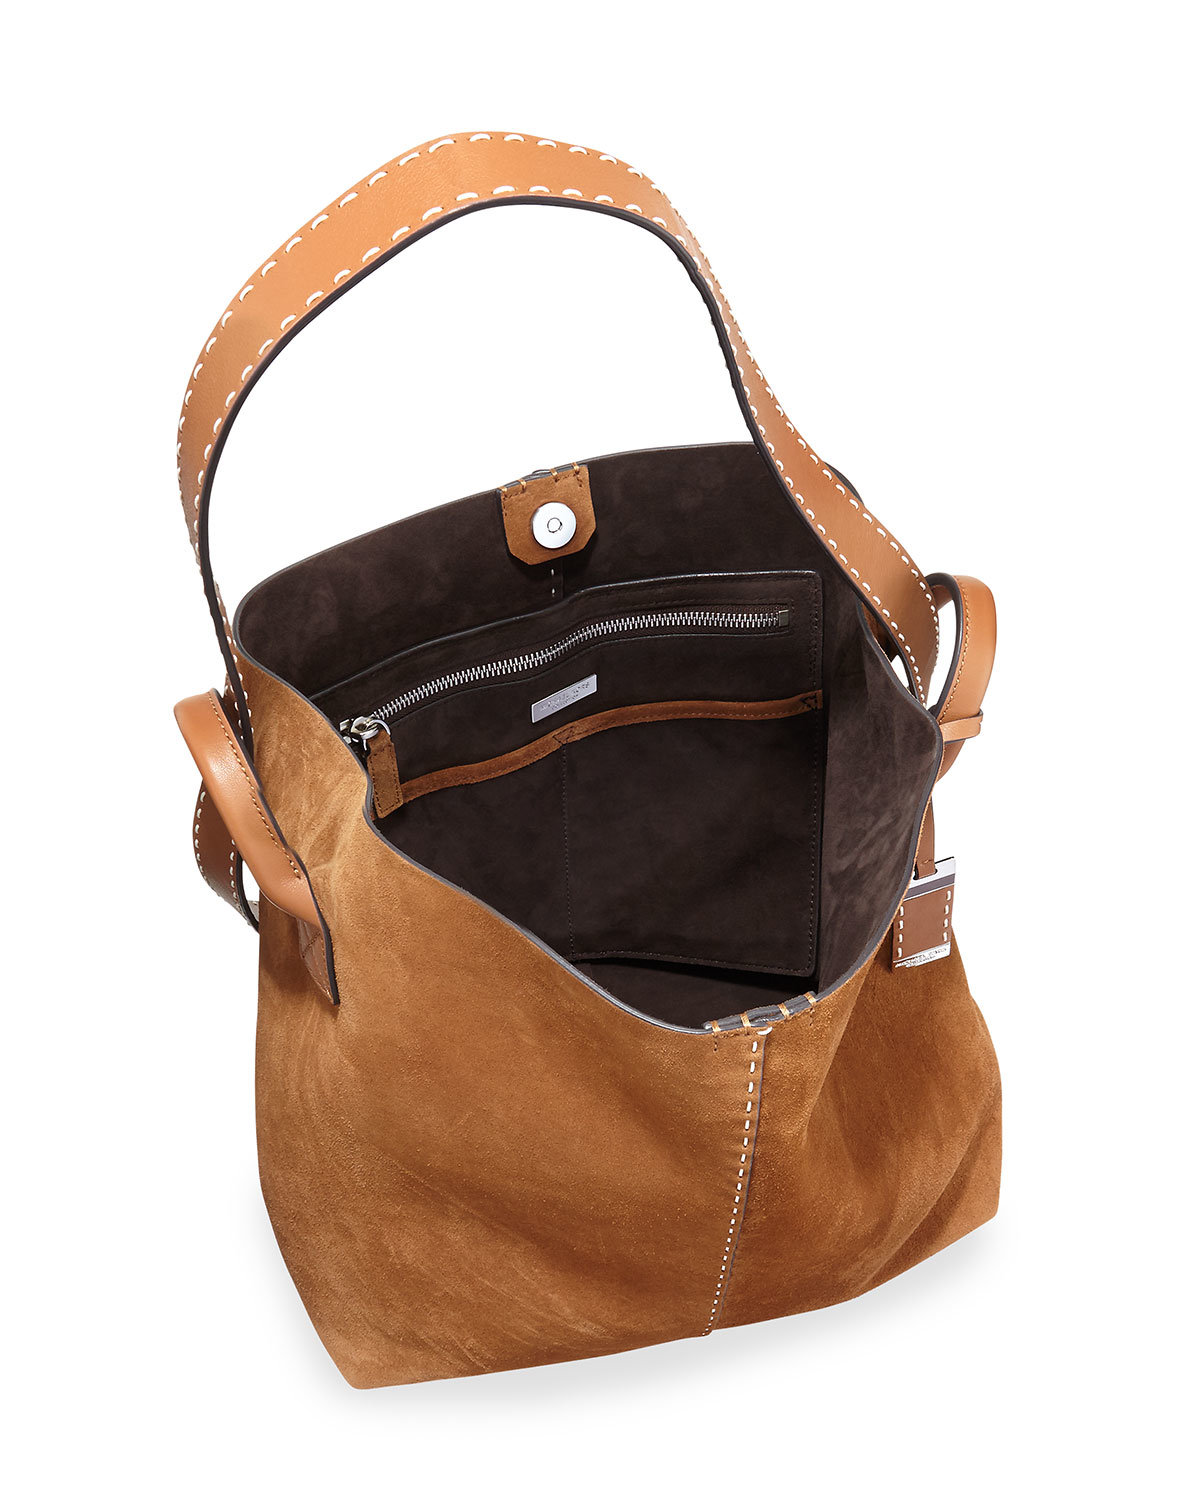 Lyst - Michael Kors Rogers Large Leather Hobo Bag in Brown